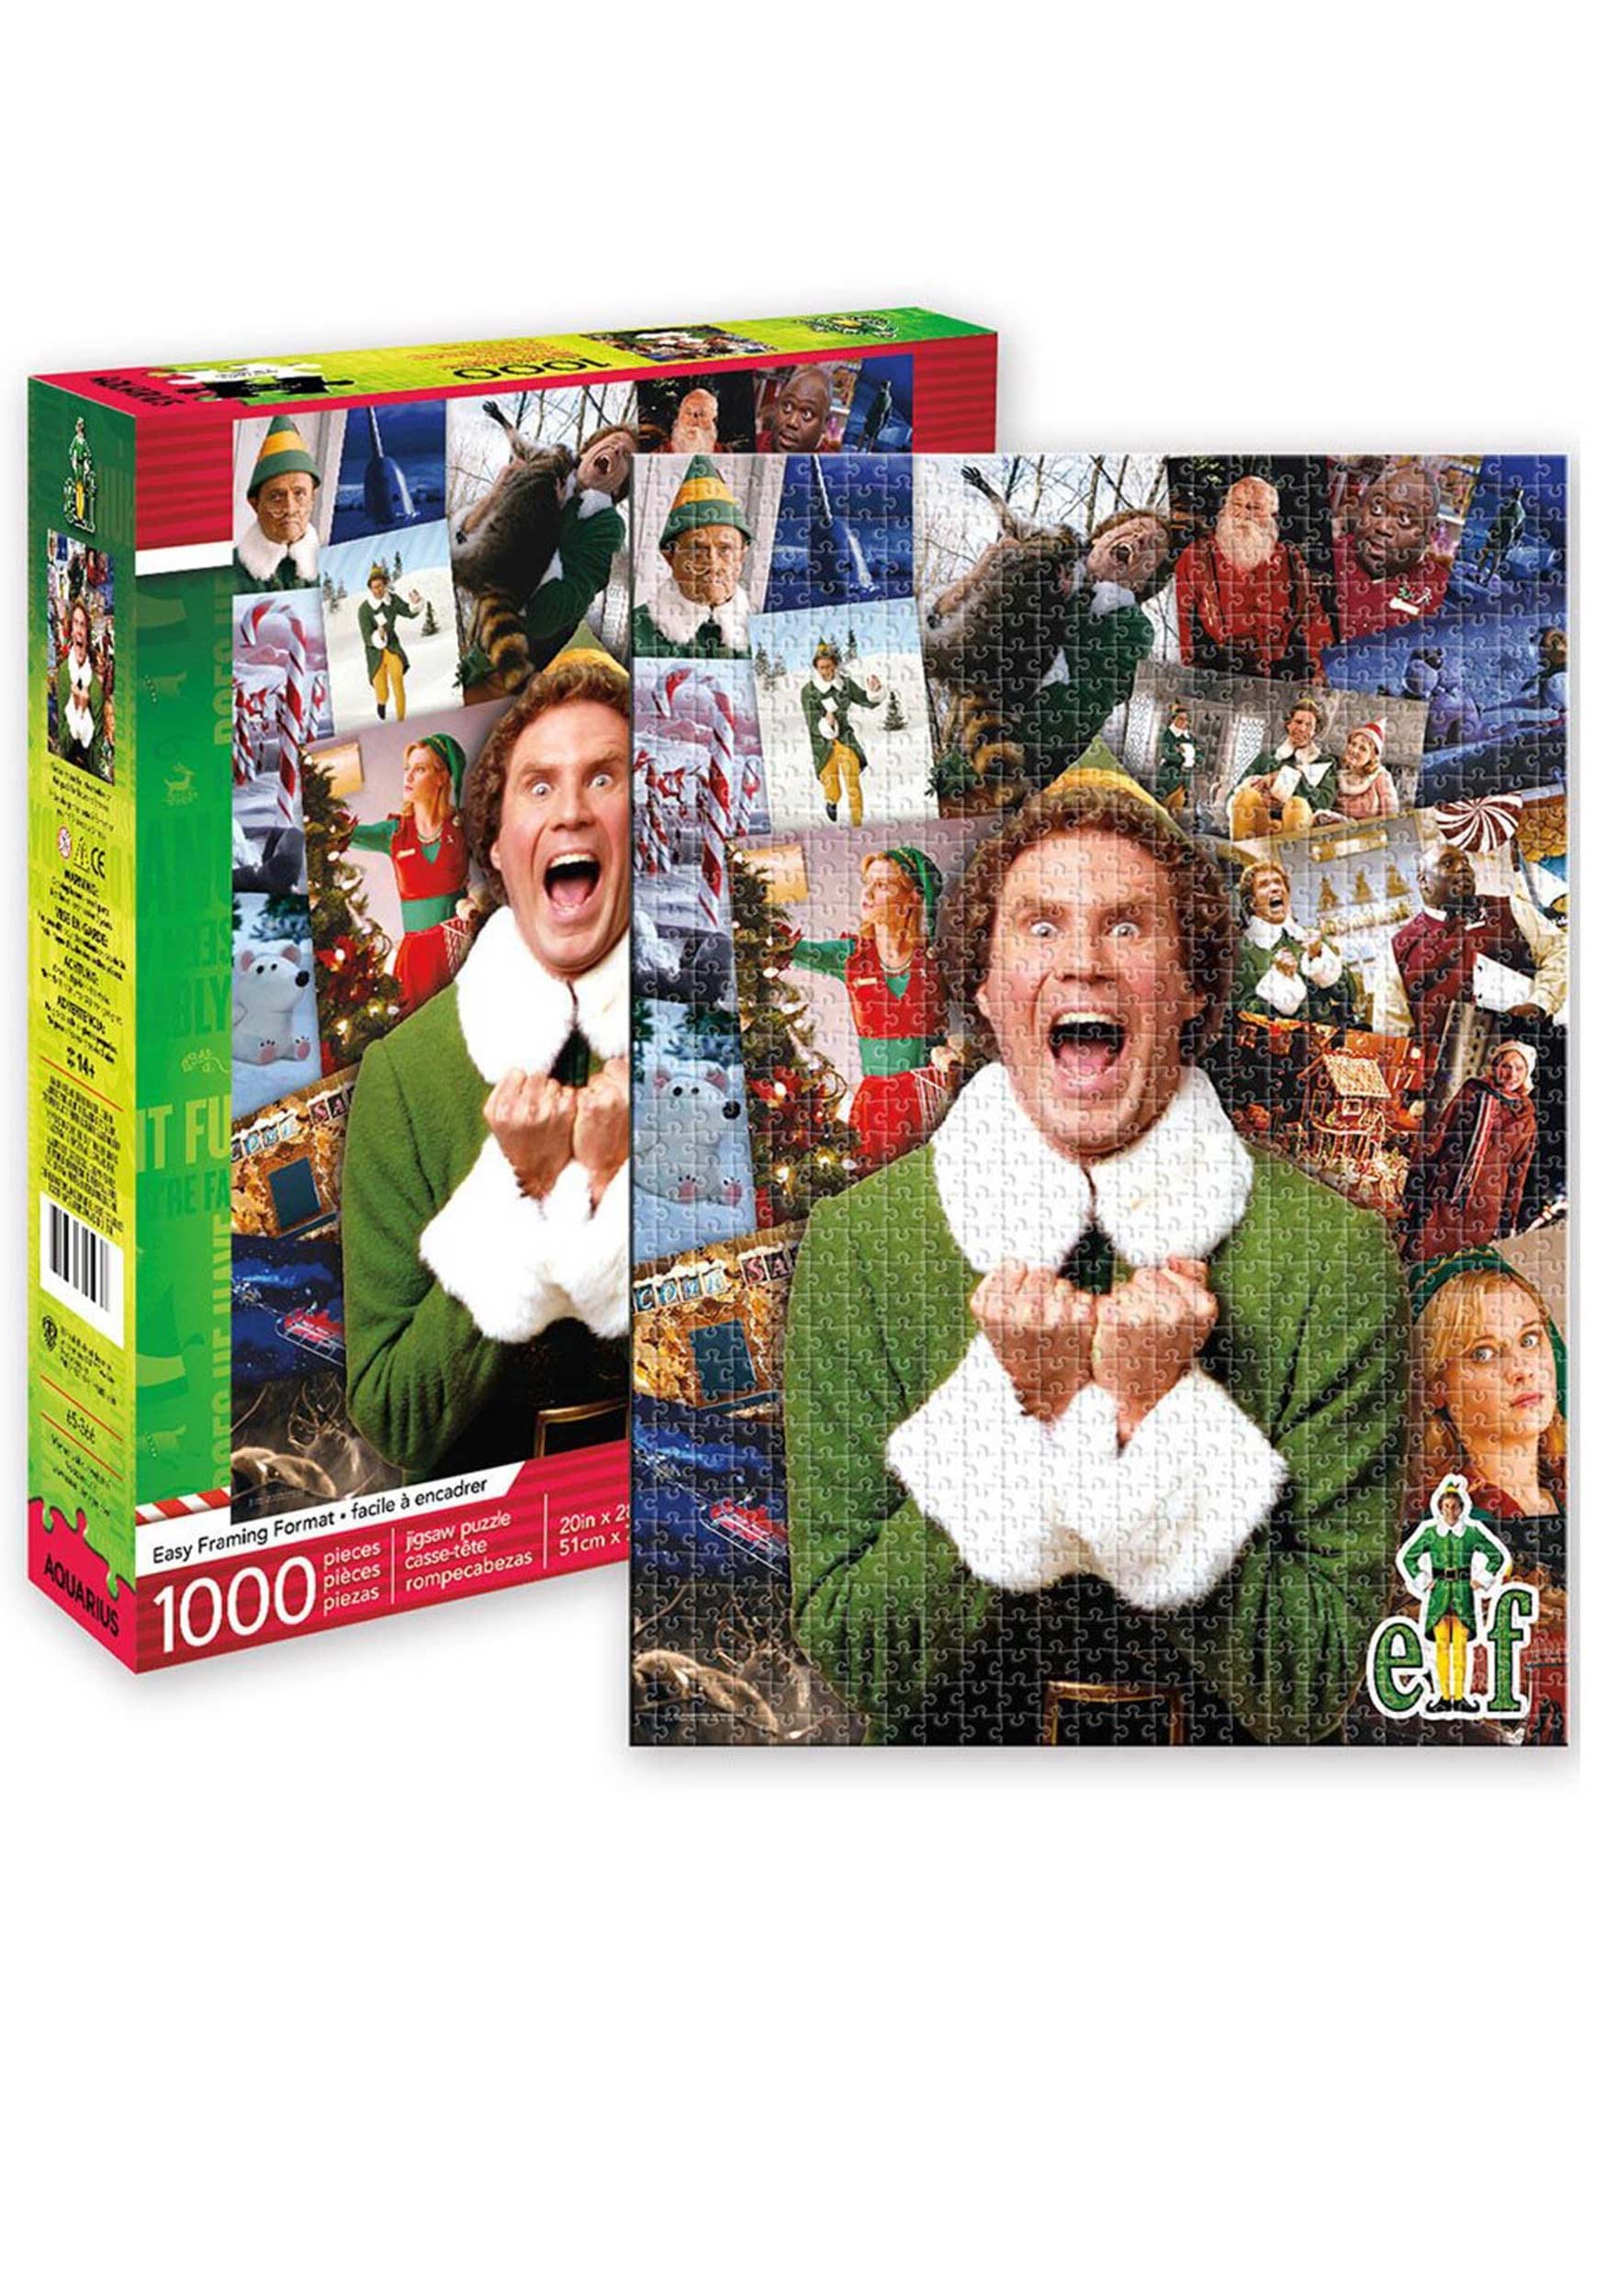 1000 Pc Jigsaw Puzzle Elf Collage